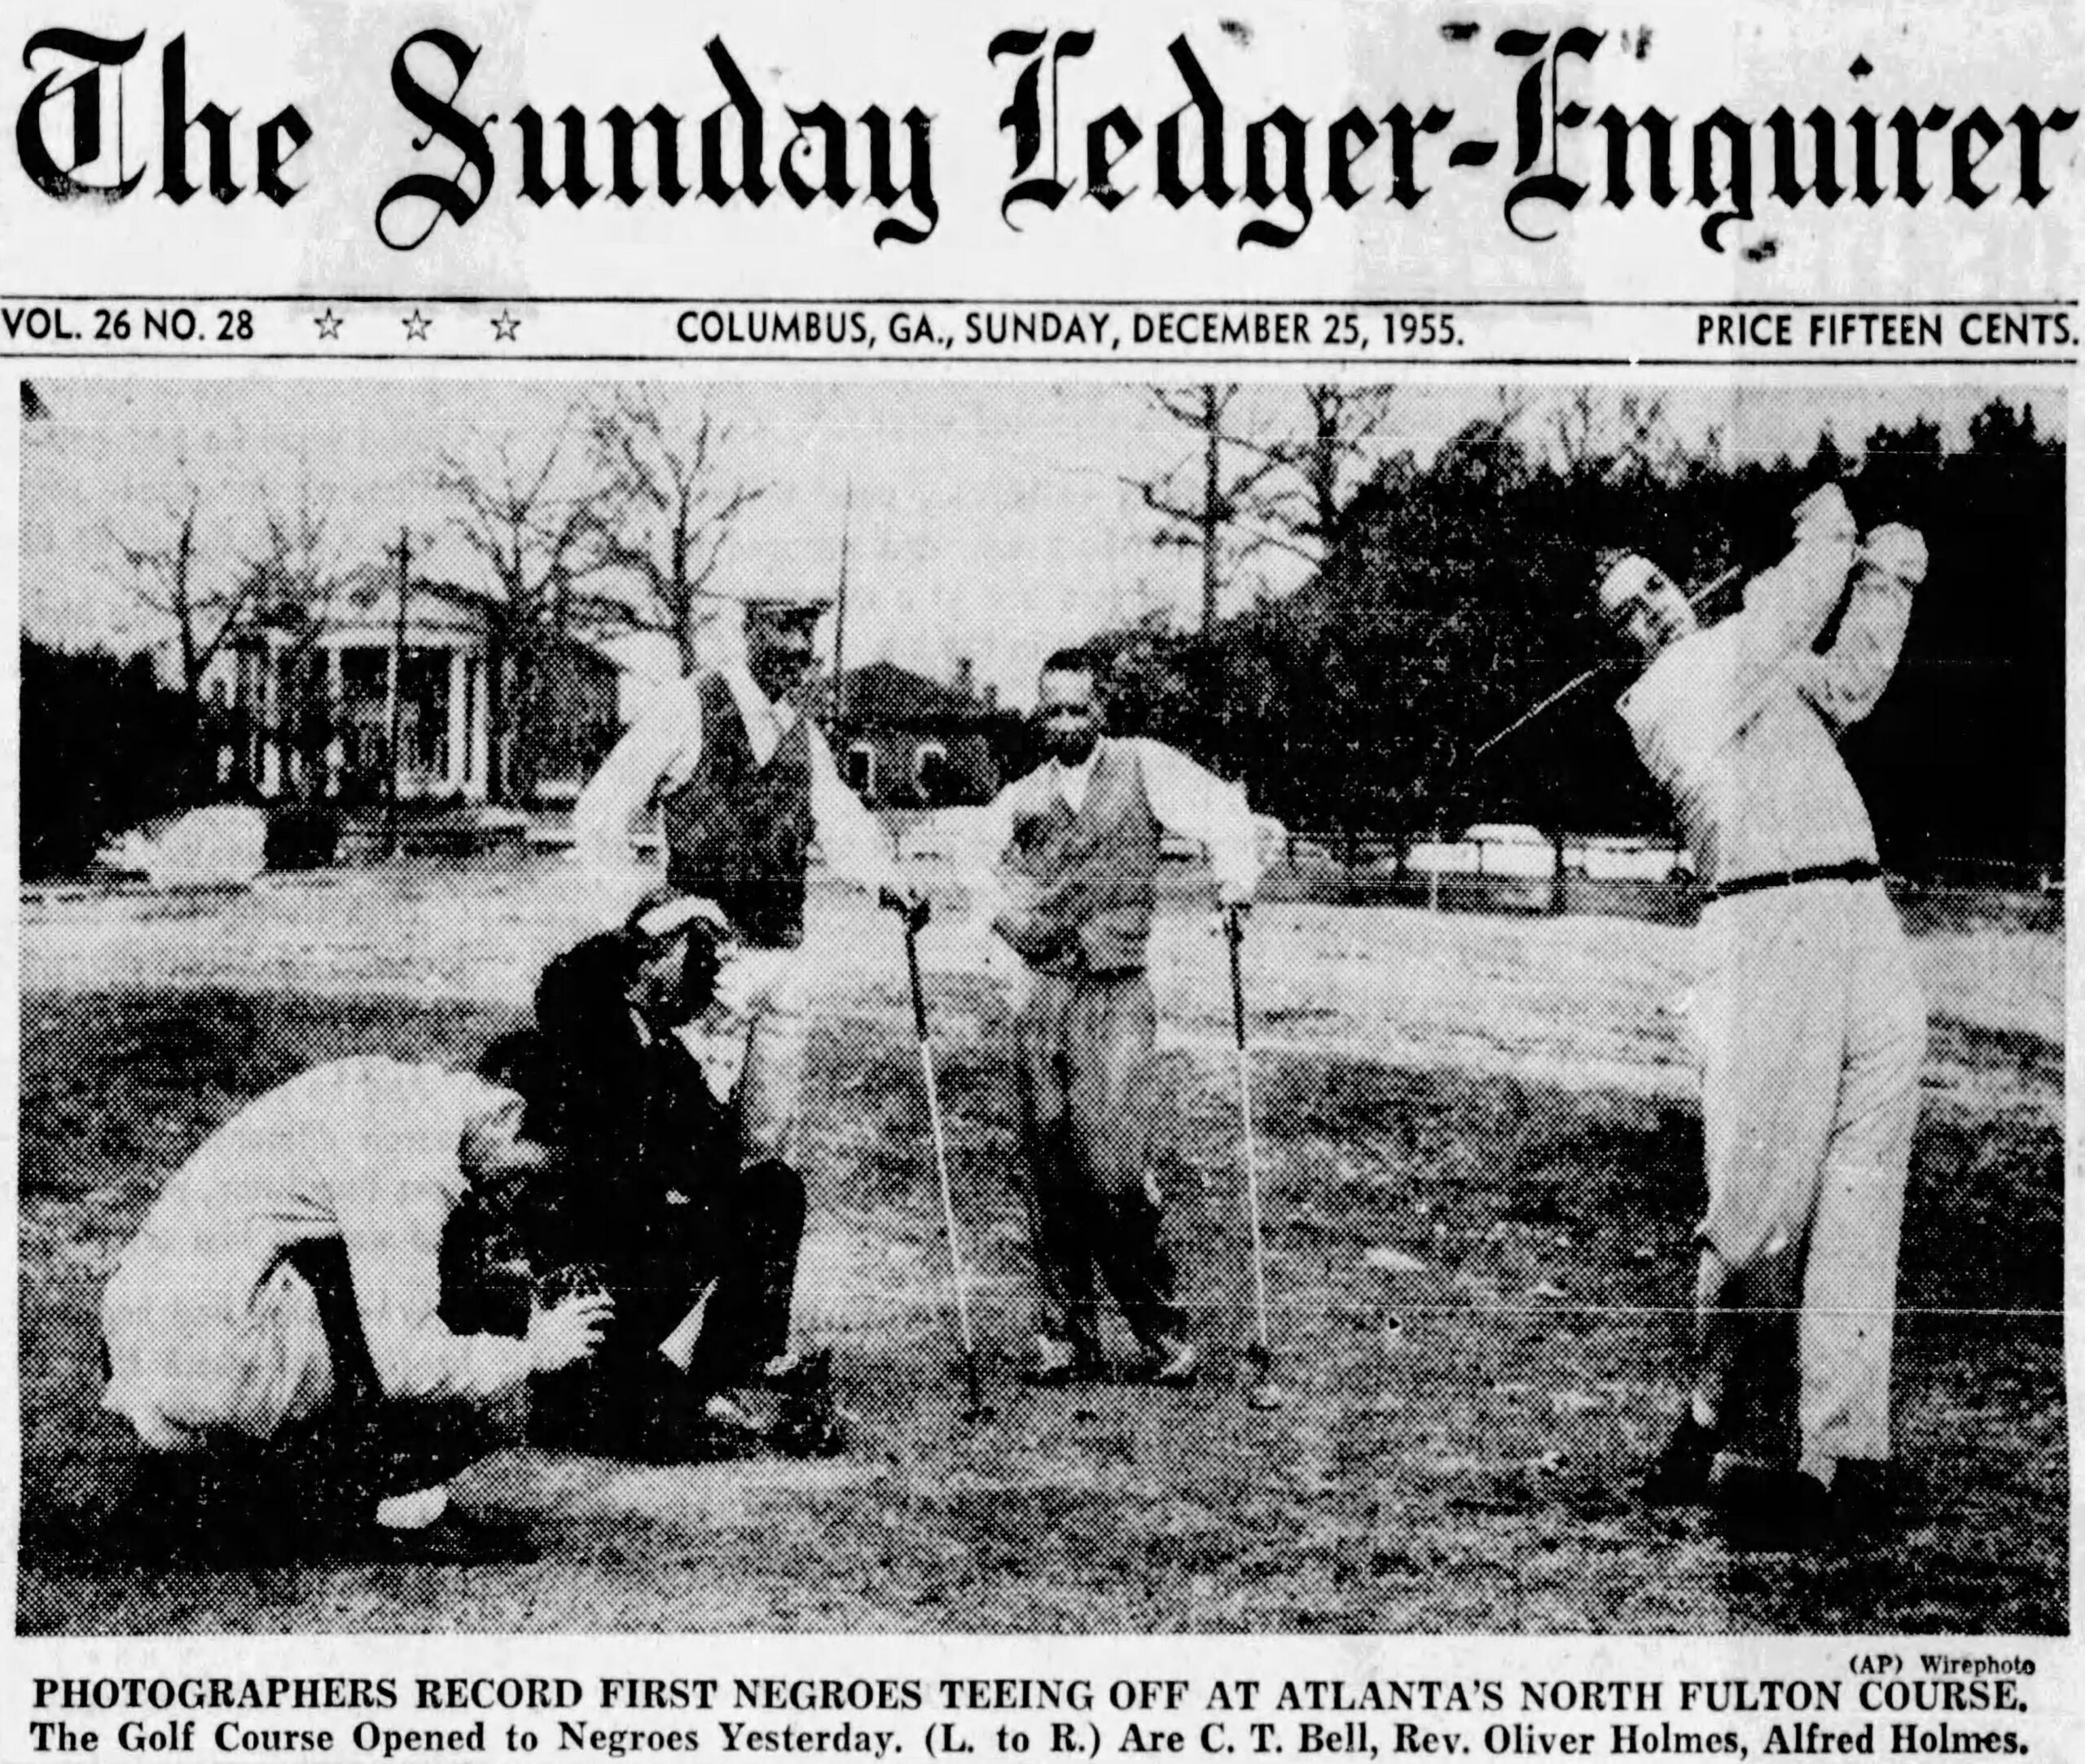 “Photographers Record First Negroes Teeing Off At Atlanta’s North Fulton Course” The Sunday Ledger-Enquirer newspaper clipping